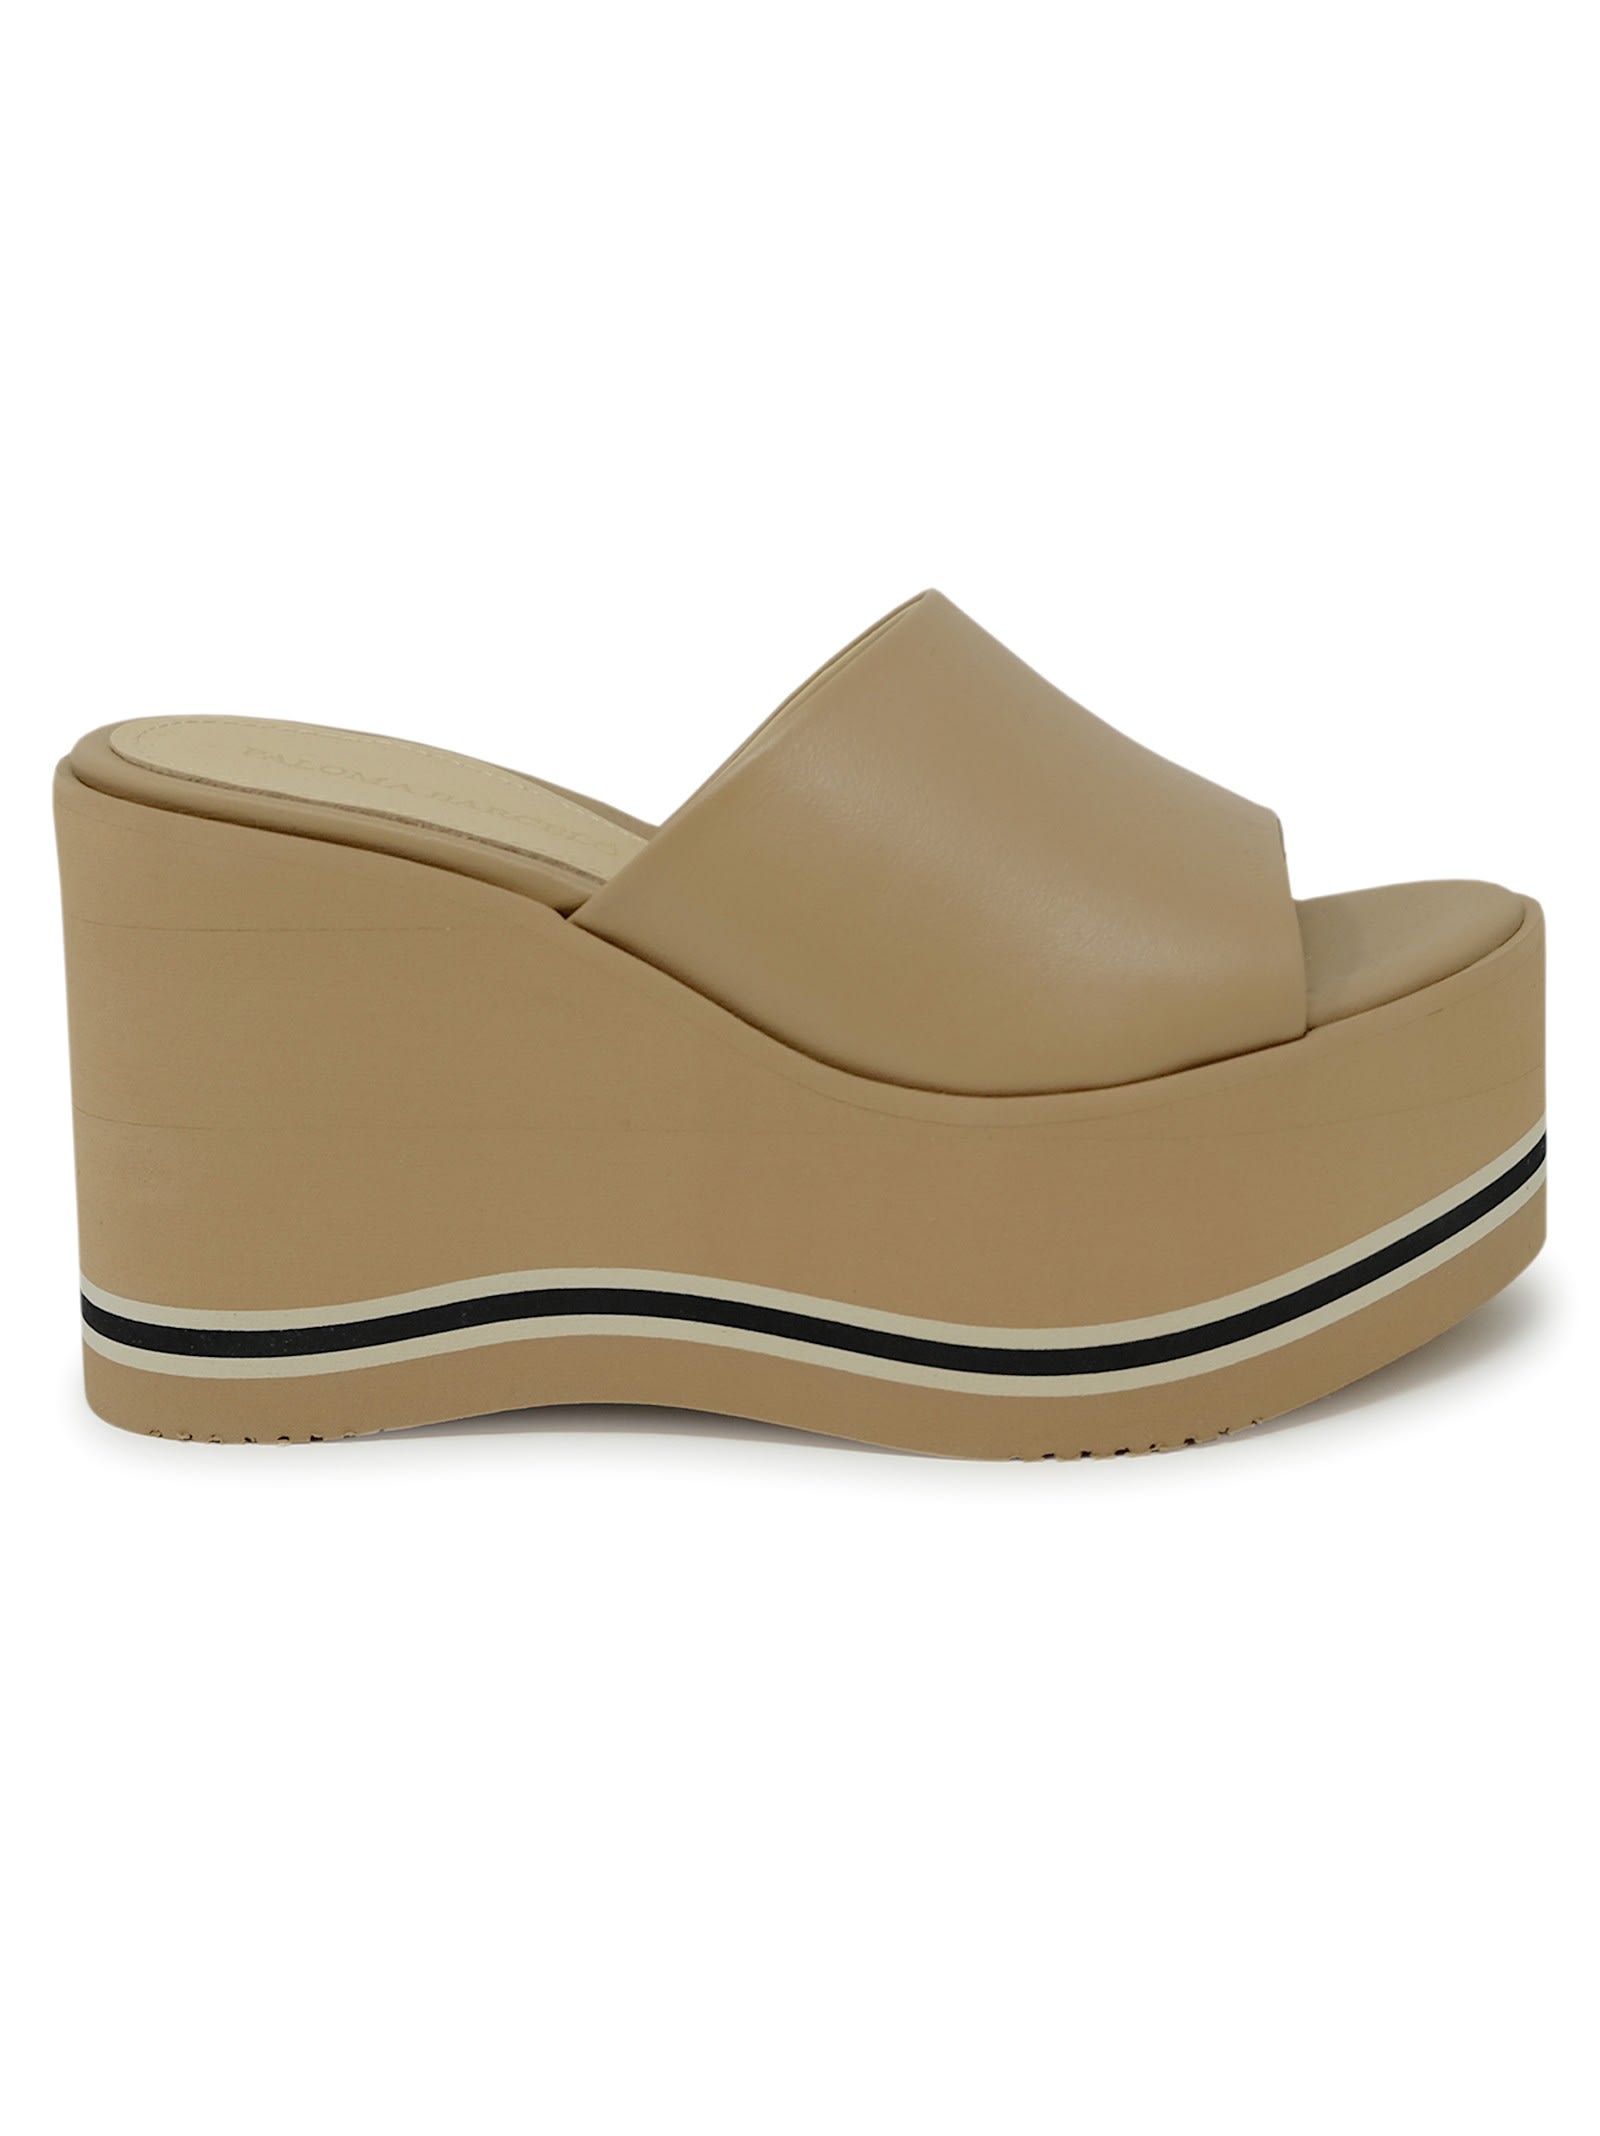 Paloma Barceló Paloma Barcelo Leather Leto Wedge Sandals In Beige